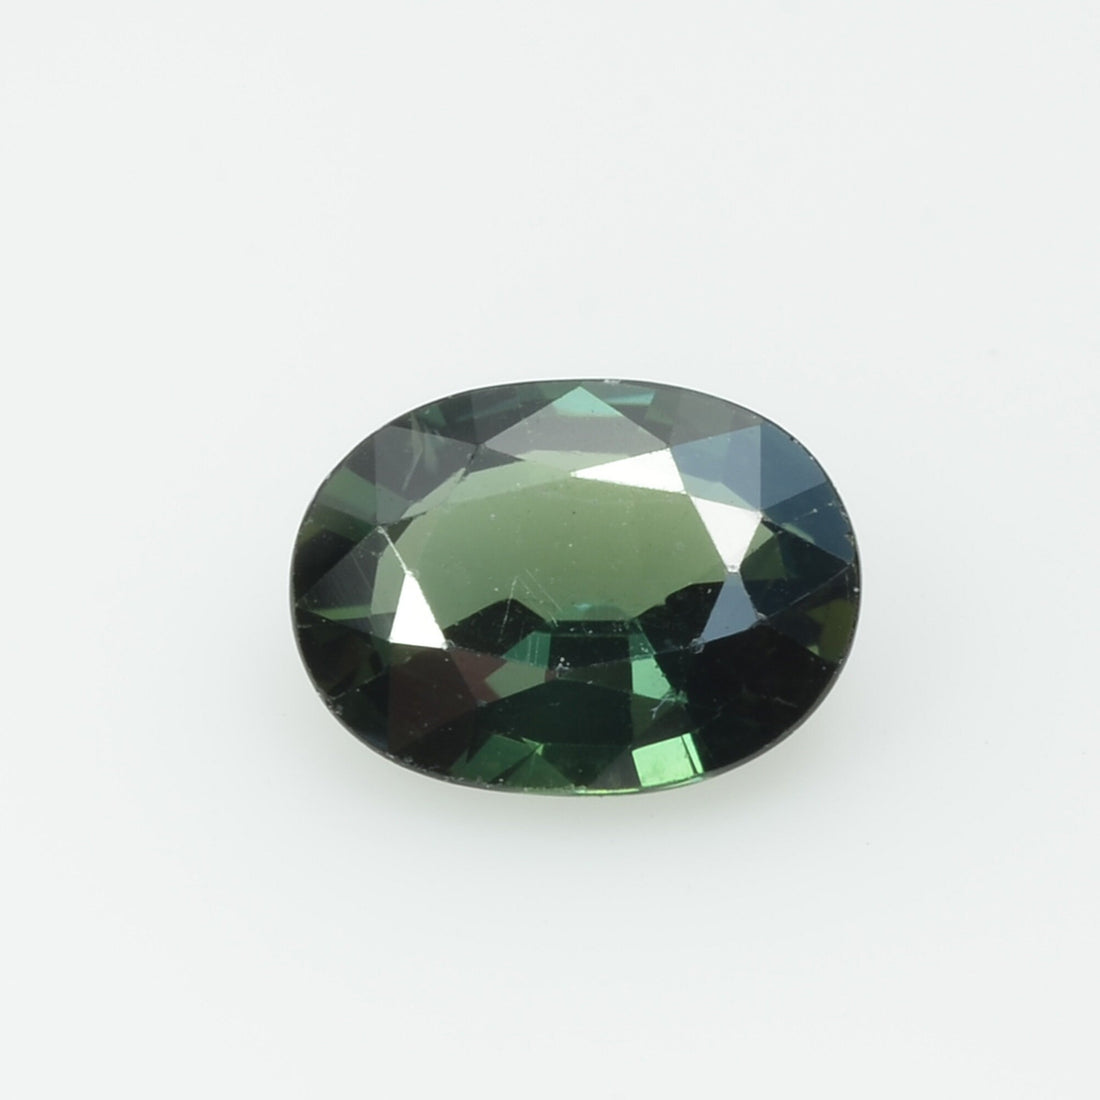 1.27 cts Natural Green Sapphire Loose Gemstone Oval Cut